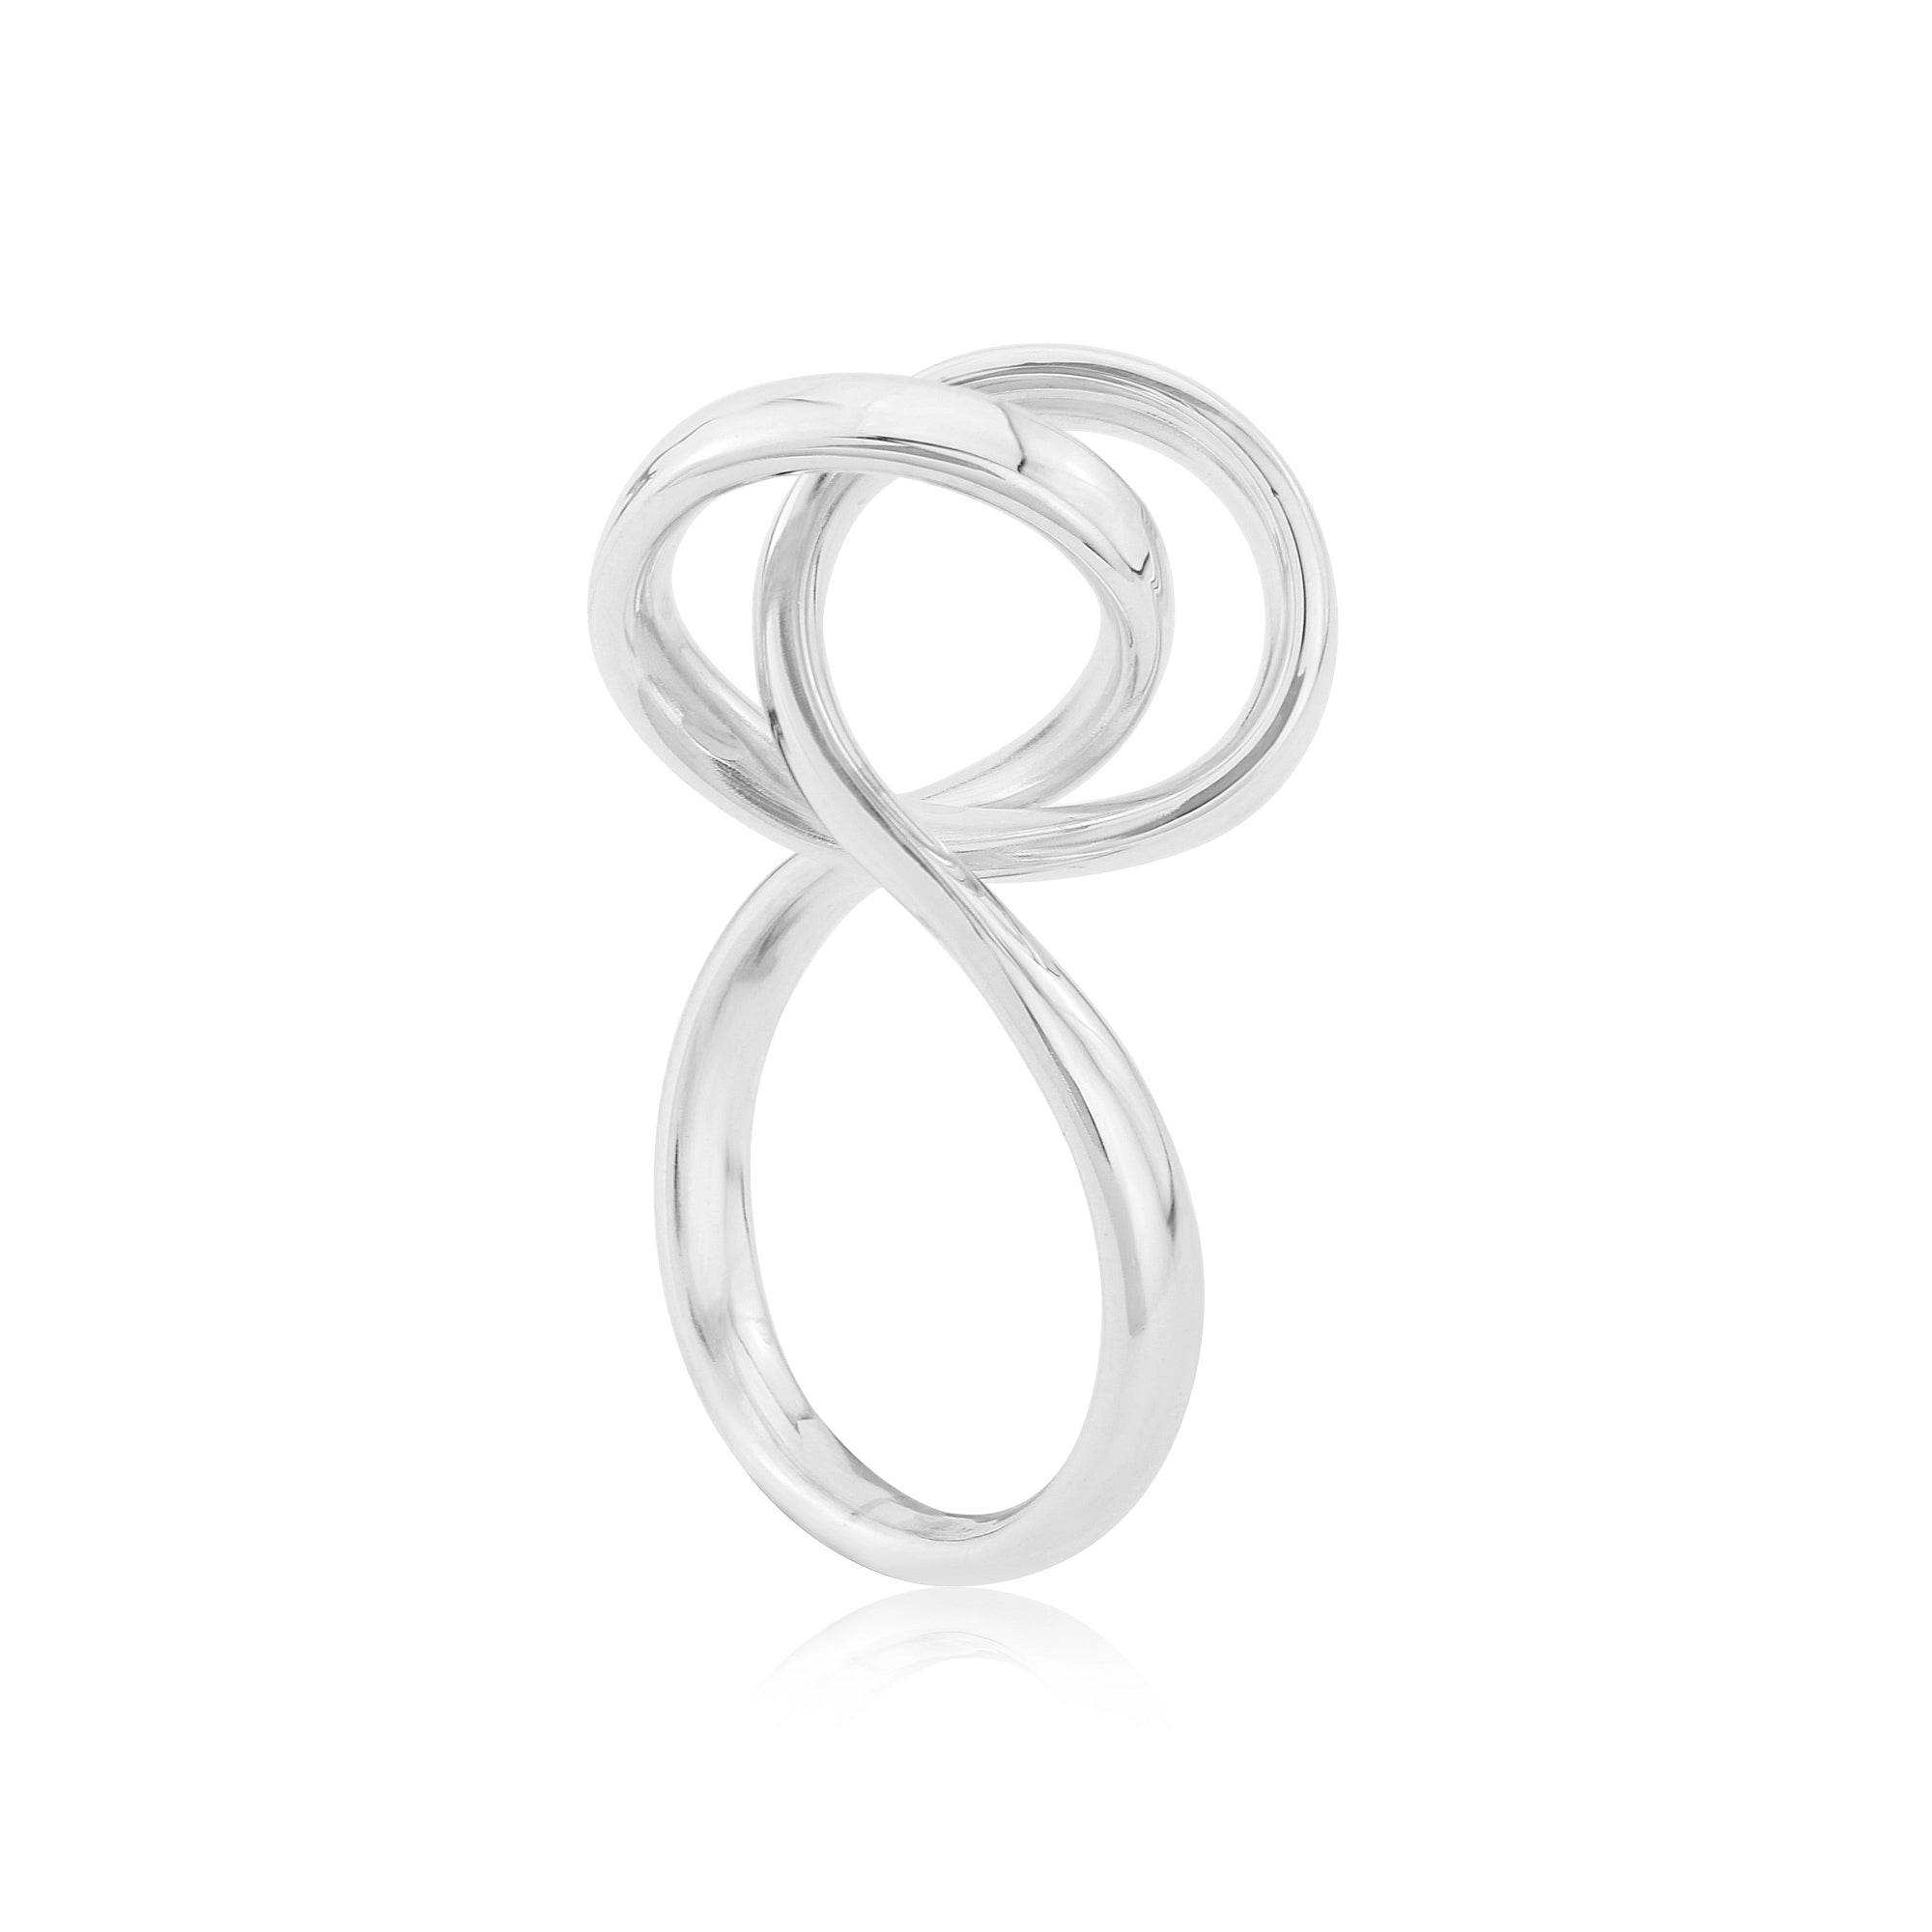 Handmade Silver Open Knot Statement Ring